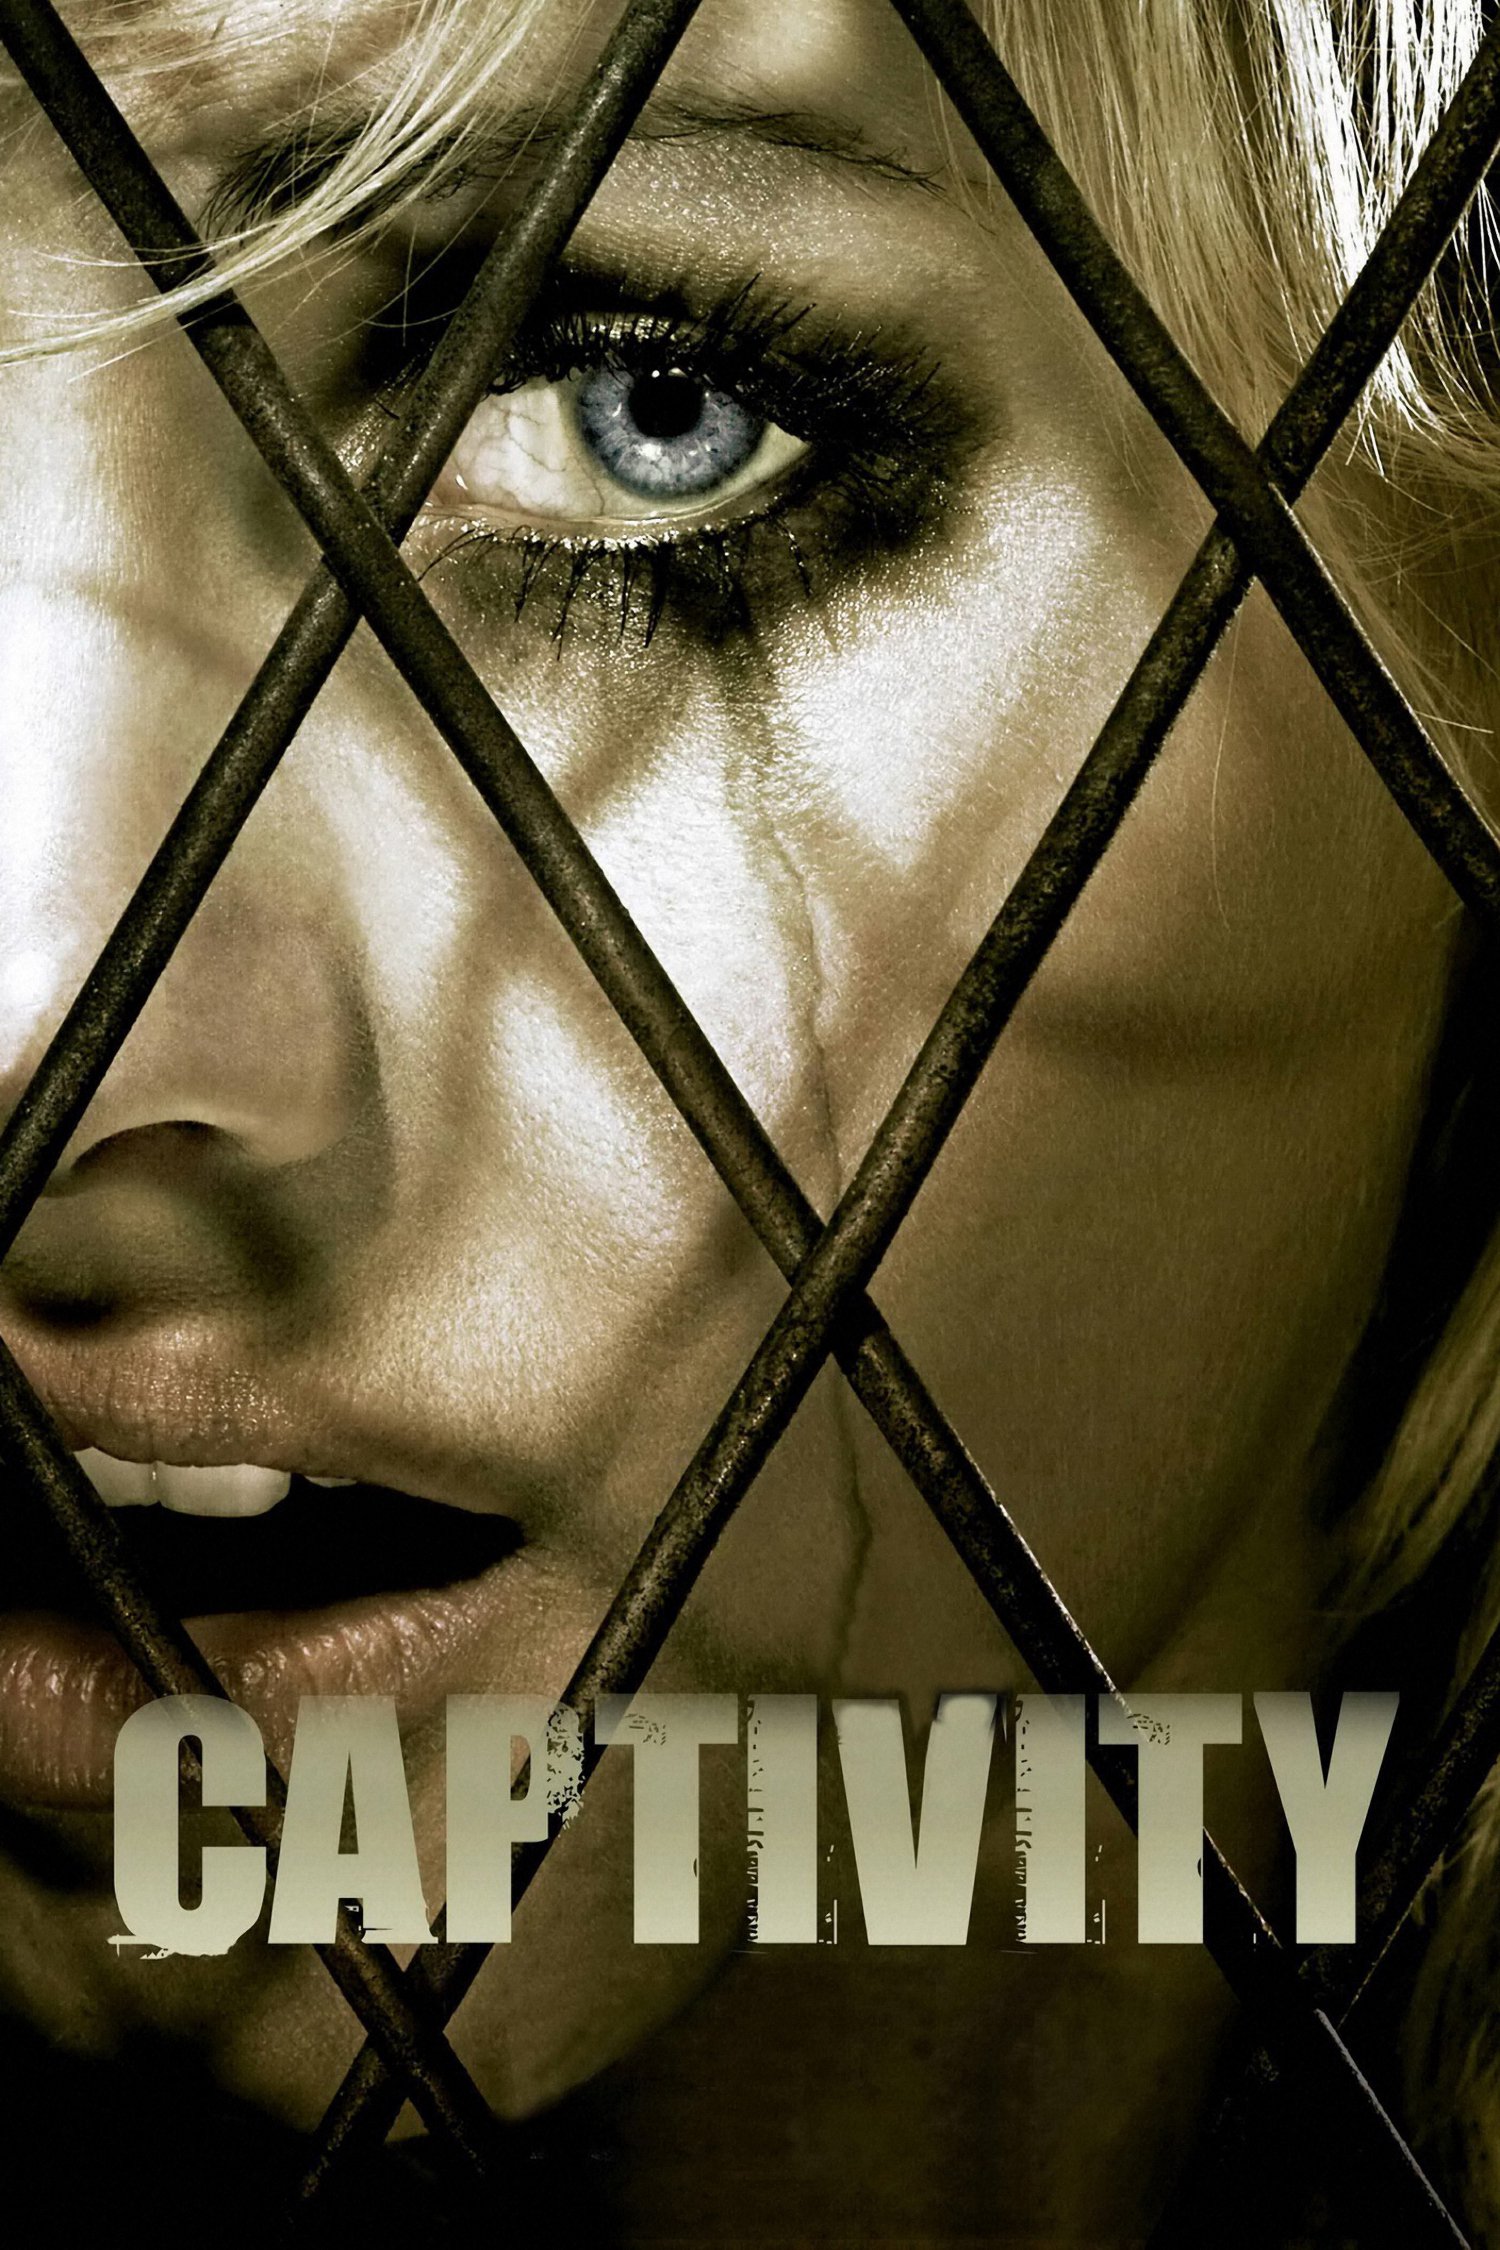 Poster for the movie "Captivity"